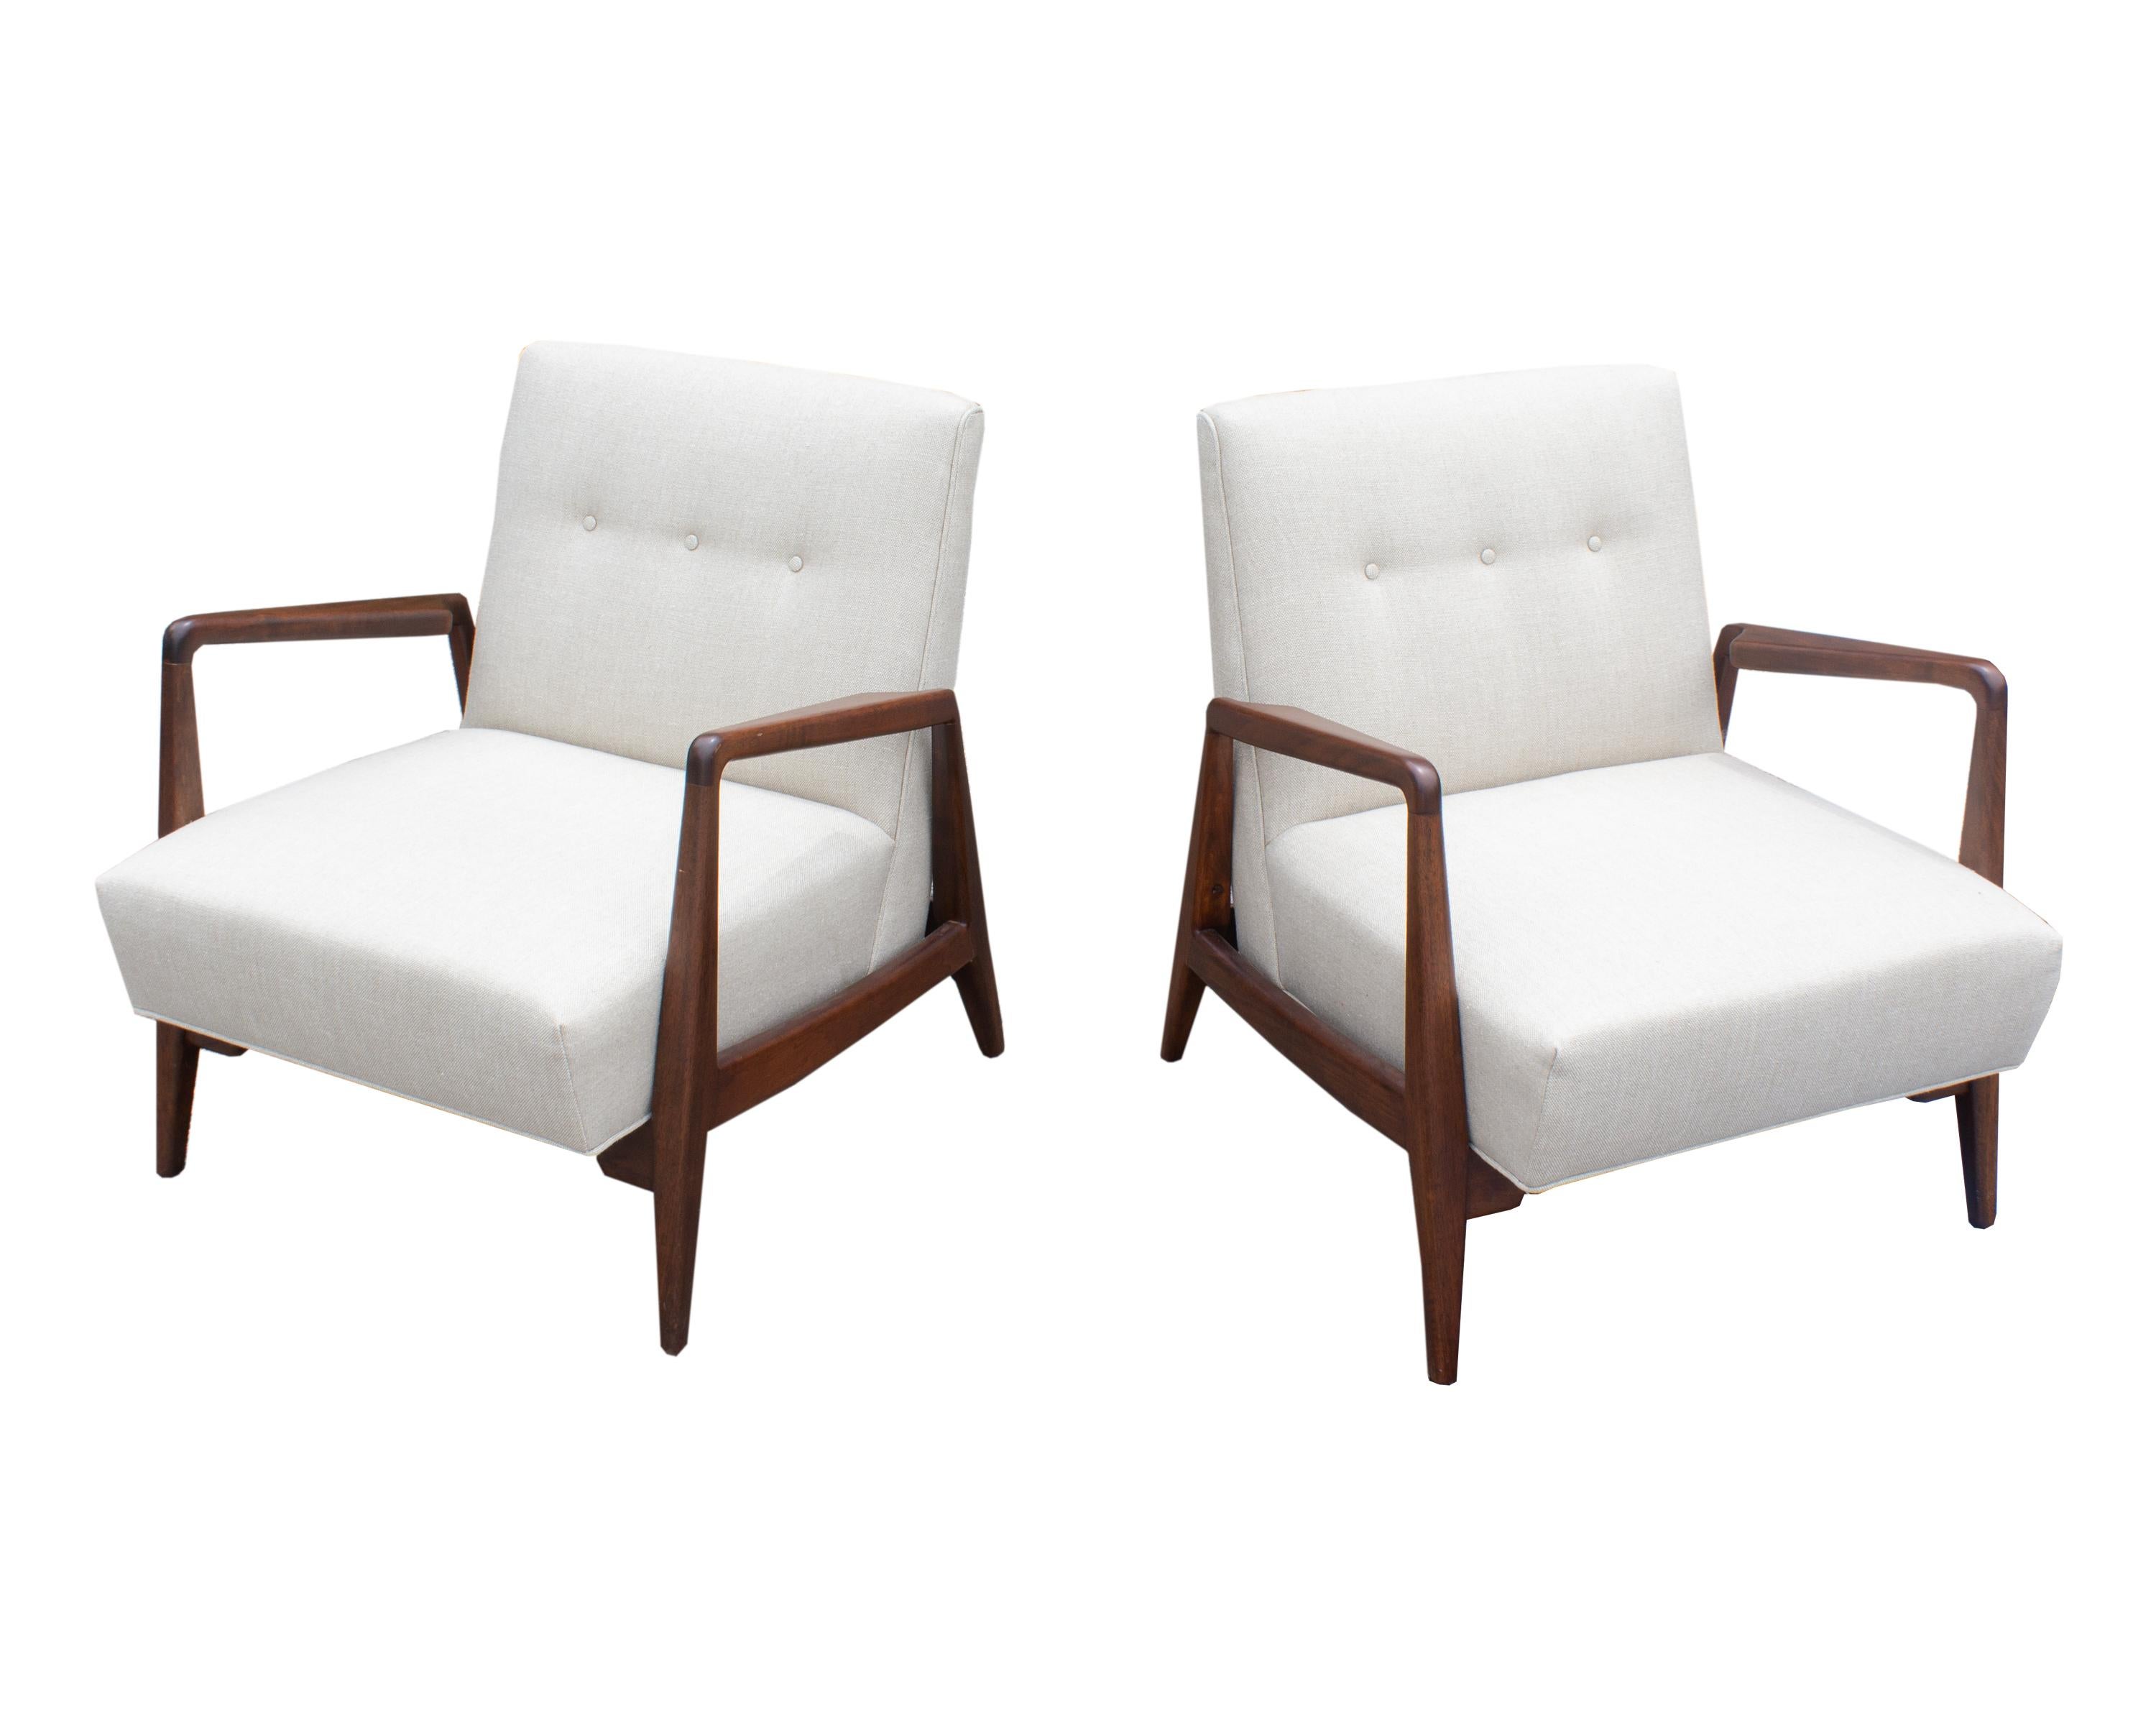 A pair of lounge chairs designed by the Danish designer Jens Risom (1916-2016). Newly upholstered, these chairs feature a walnut wood frame and a tufted back. The chairs are unmarked.

